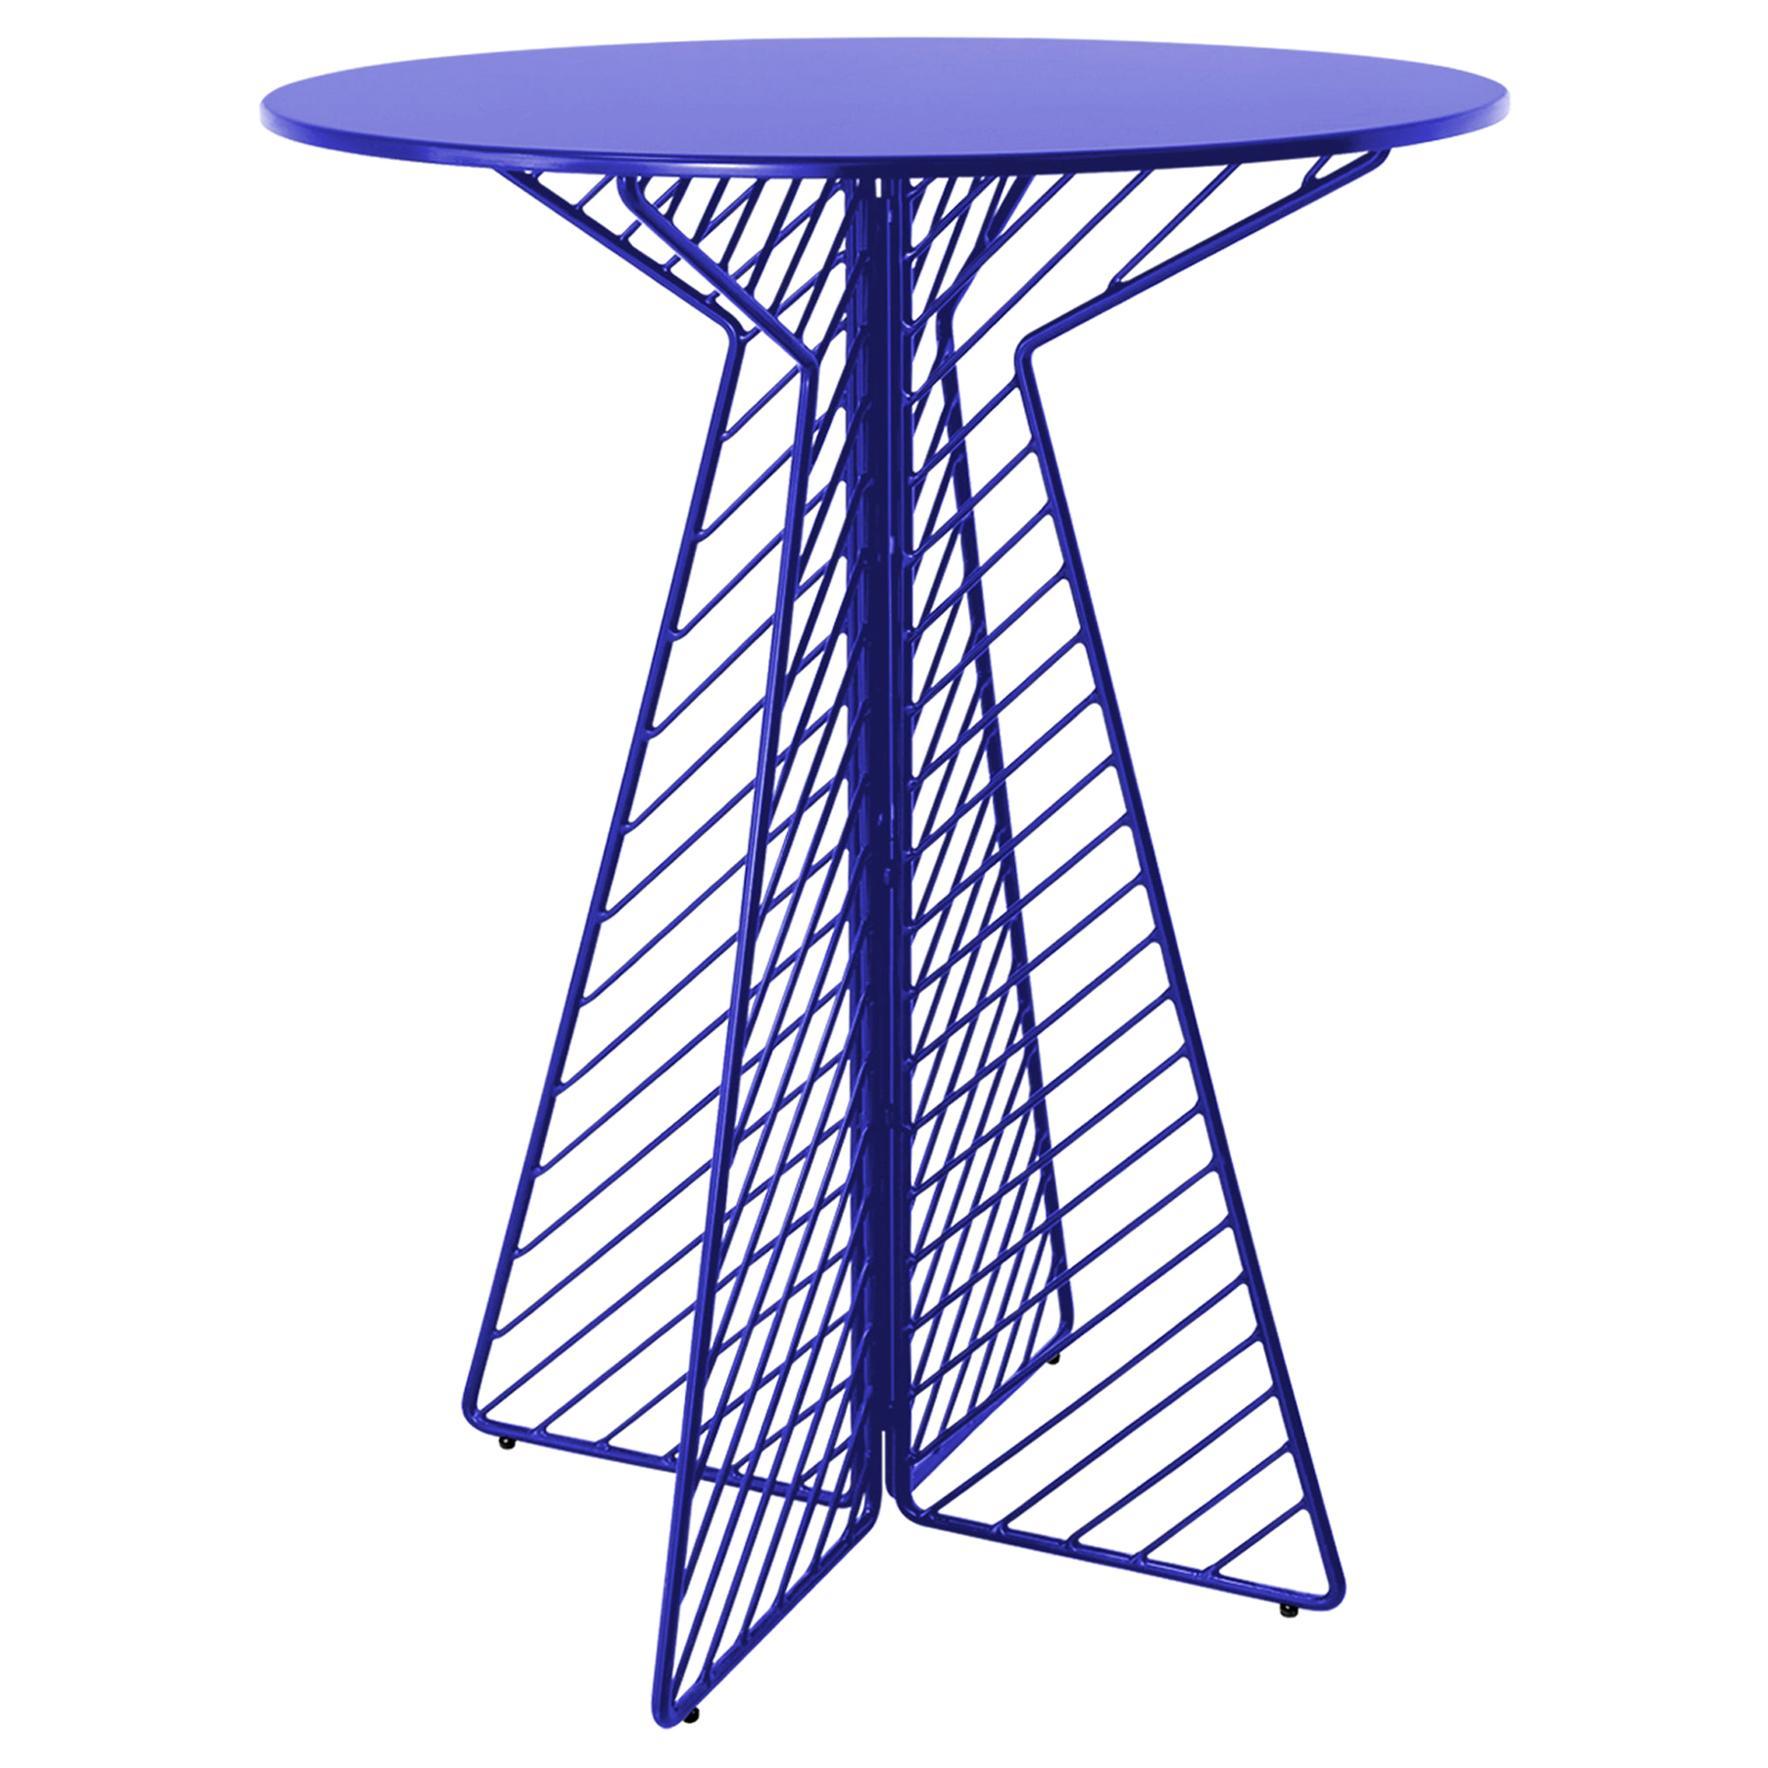 Minimalist Bar Table, Flat Pack Wire Cafe Bar Table in Electric Blue by Bend